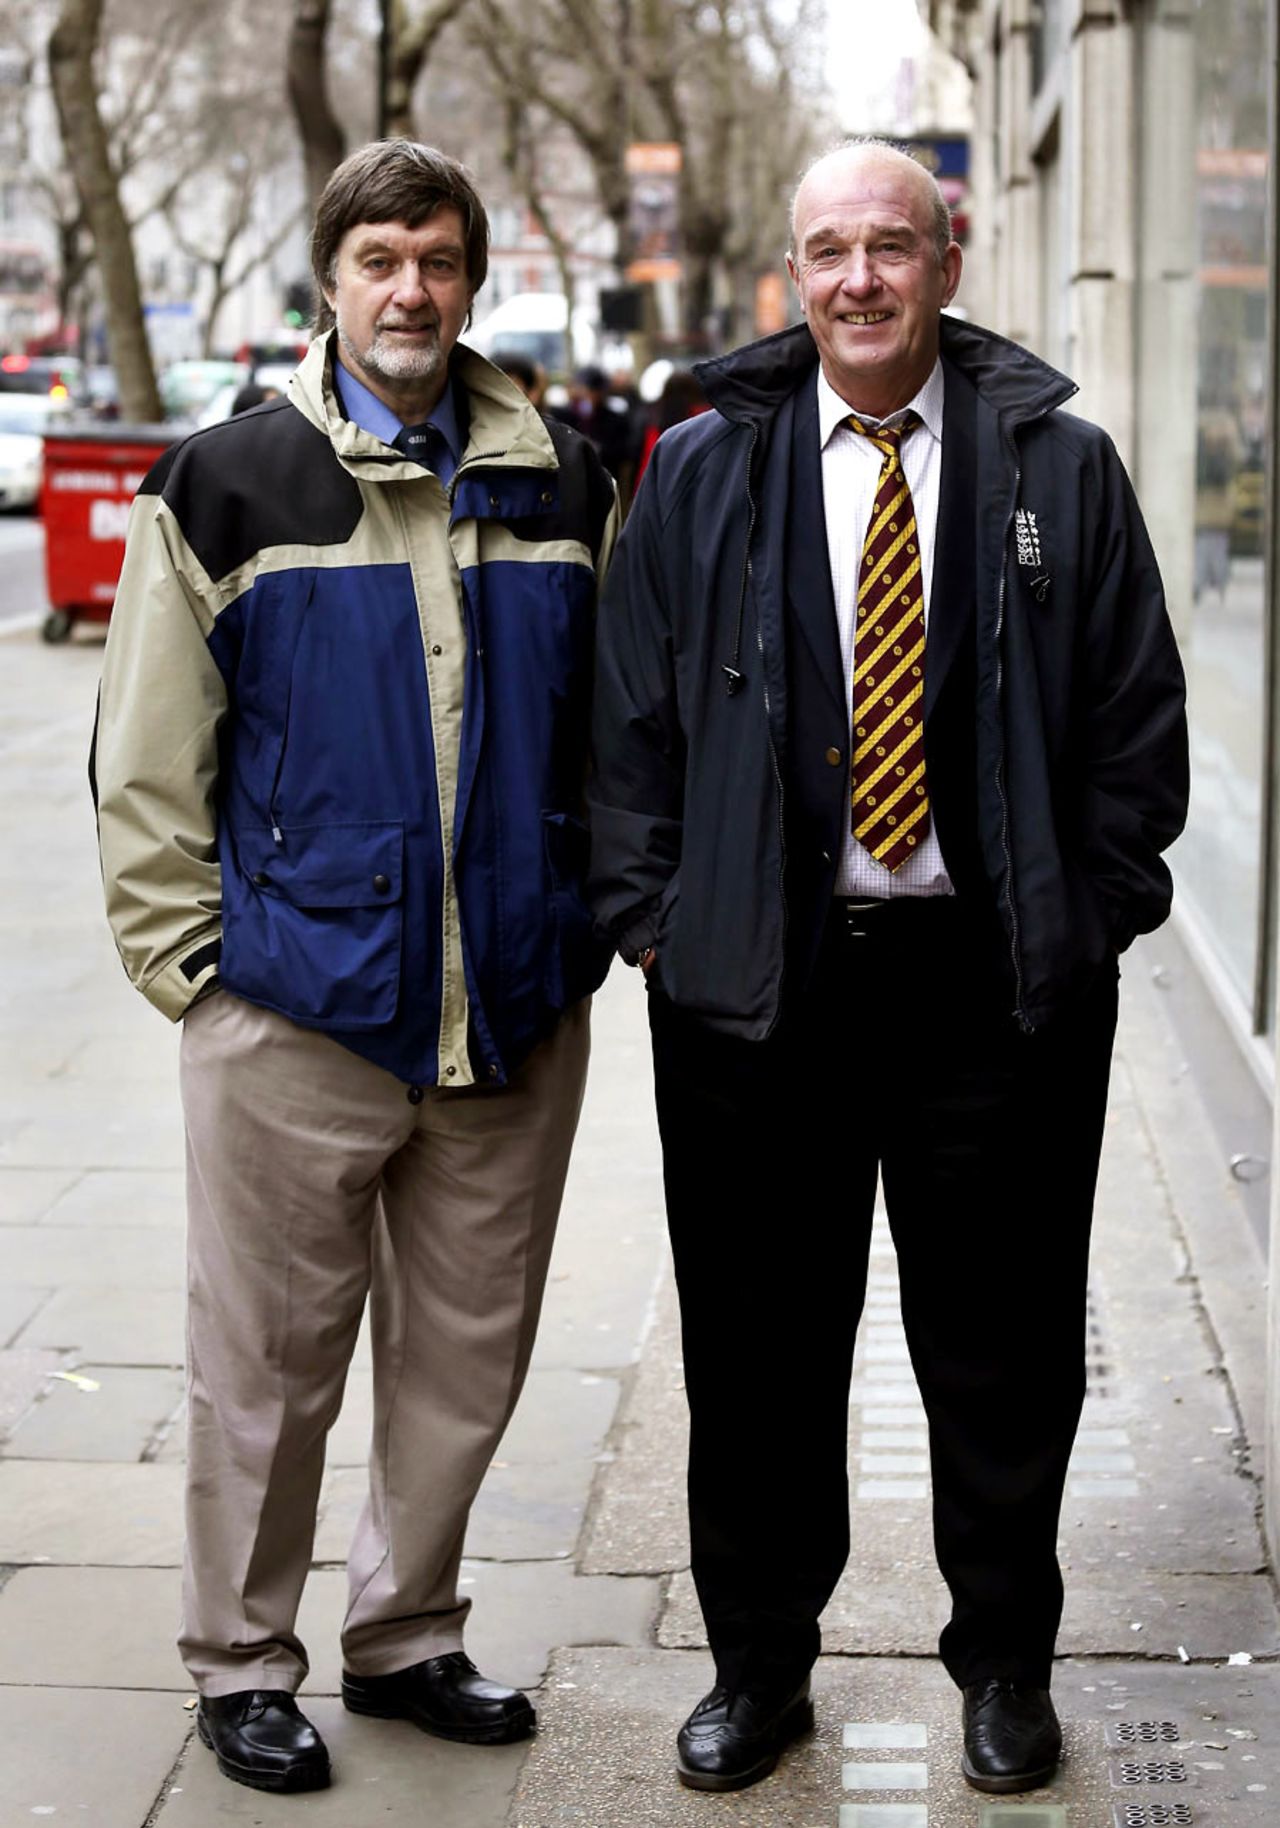 Peter Willey and George Sharp attend their employment tribunal, London, February 5, 2015